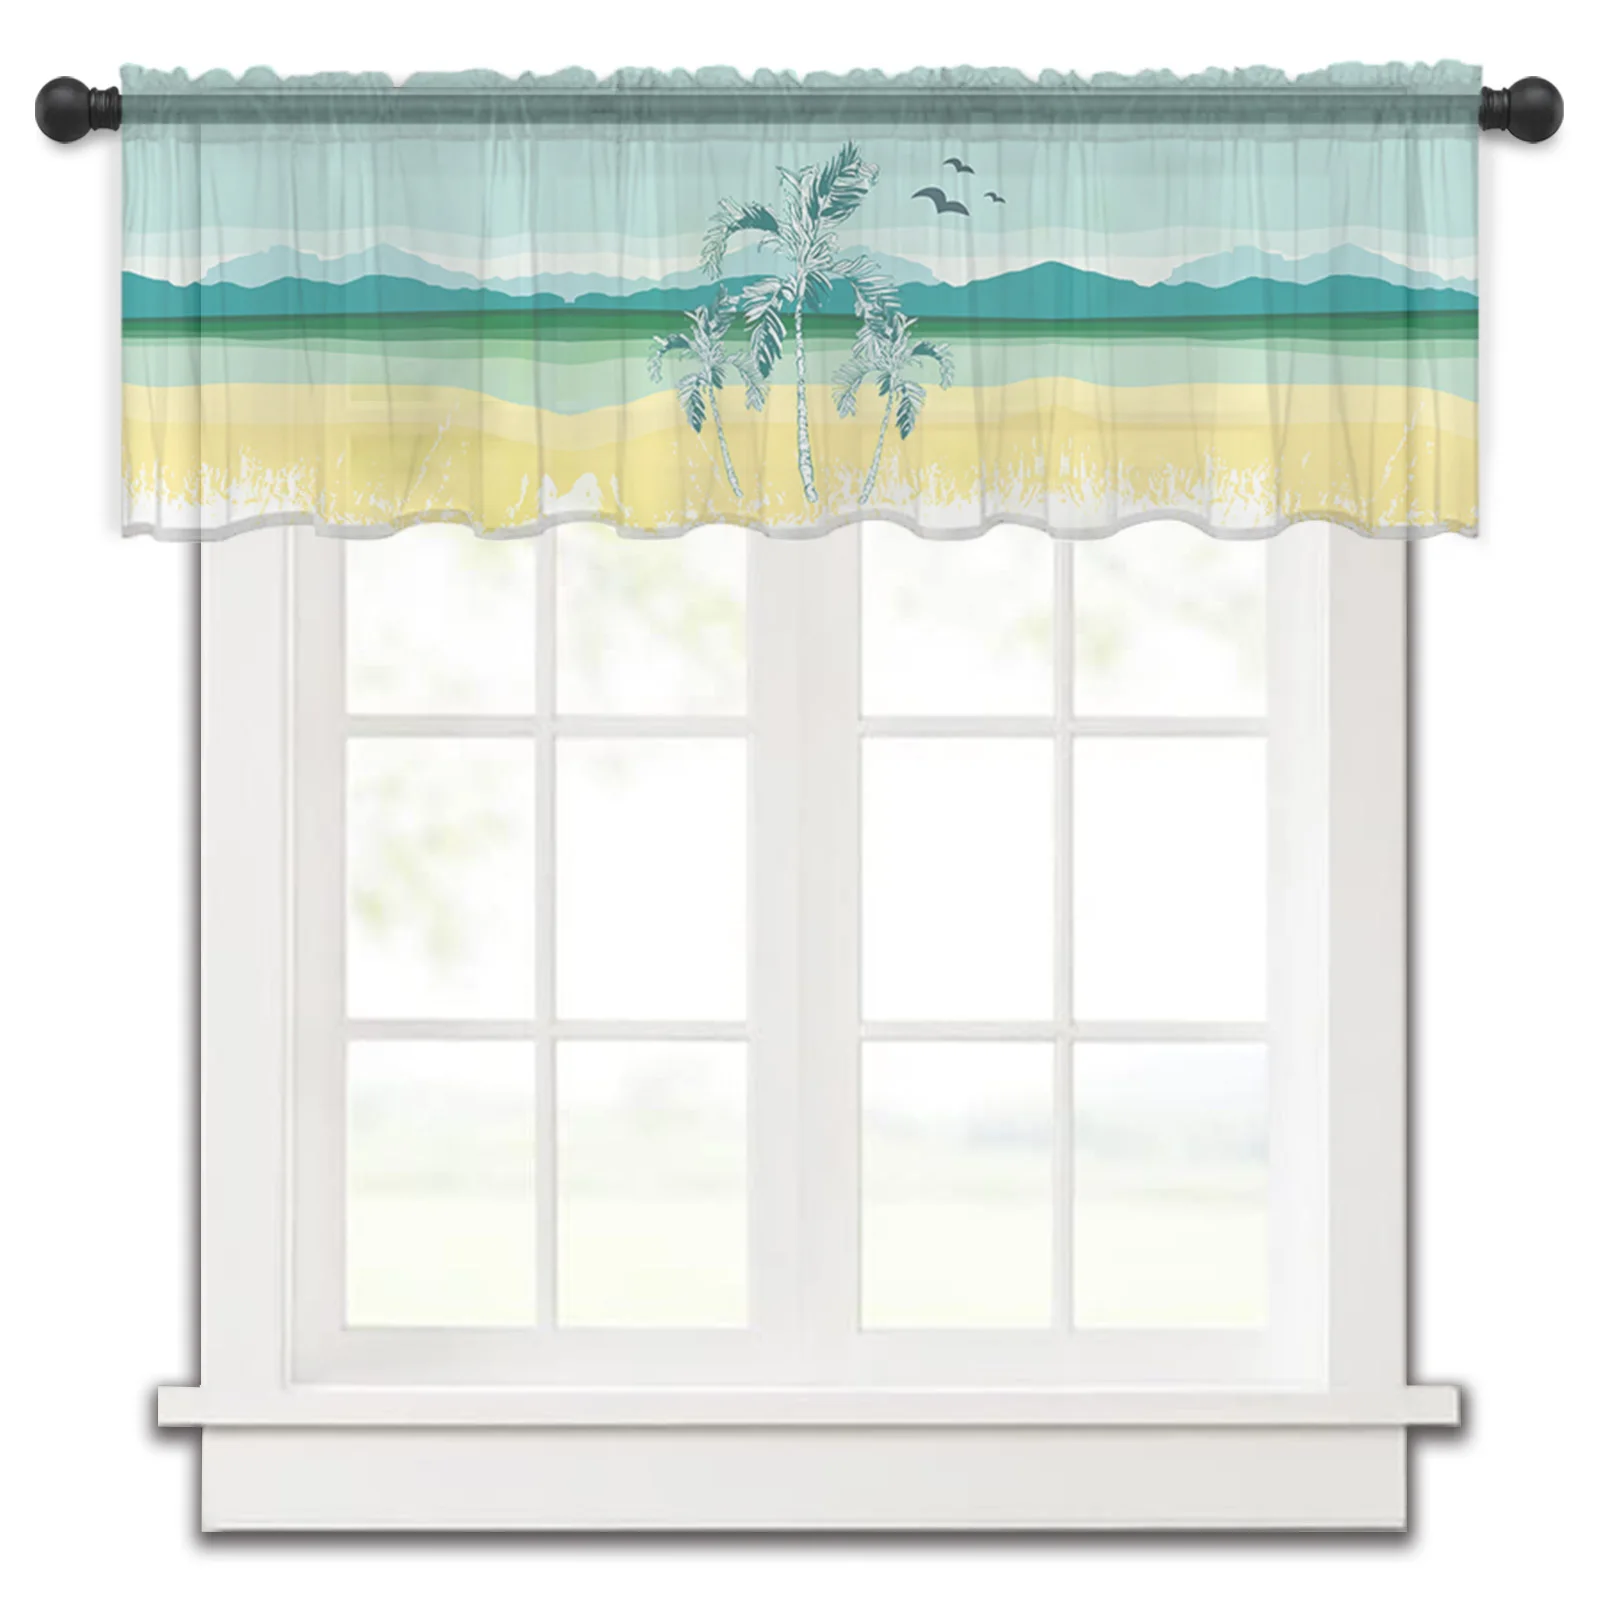 Coconut Tree Seaside Seagull Kitchen Small Window Curtain Tulle Sheer Short Curtain Bedroom Living Room Home Decor Voile Drapes